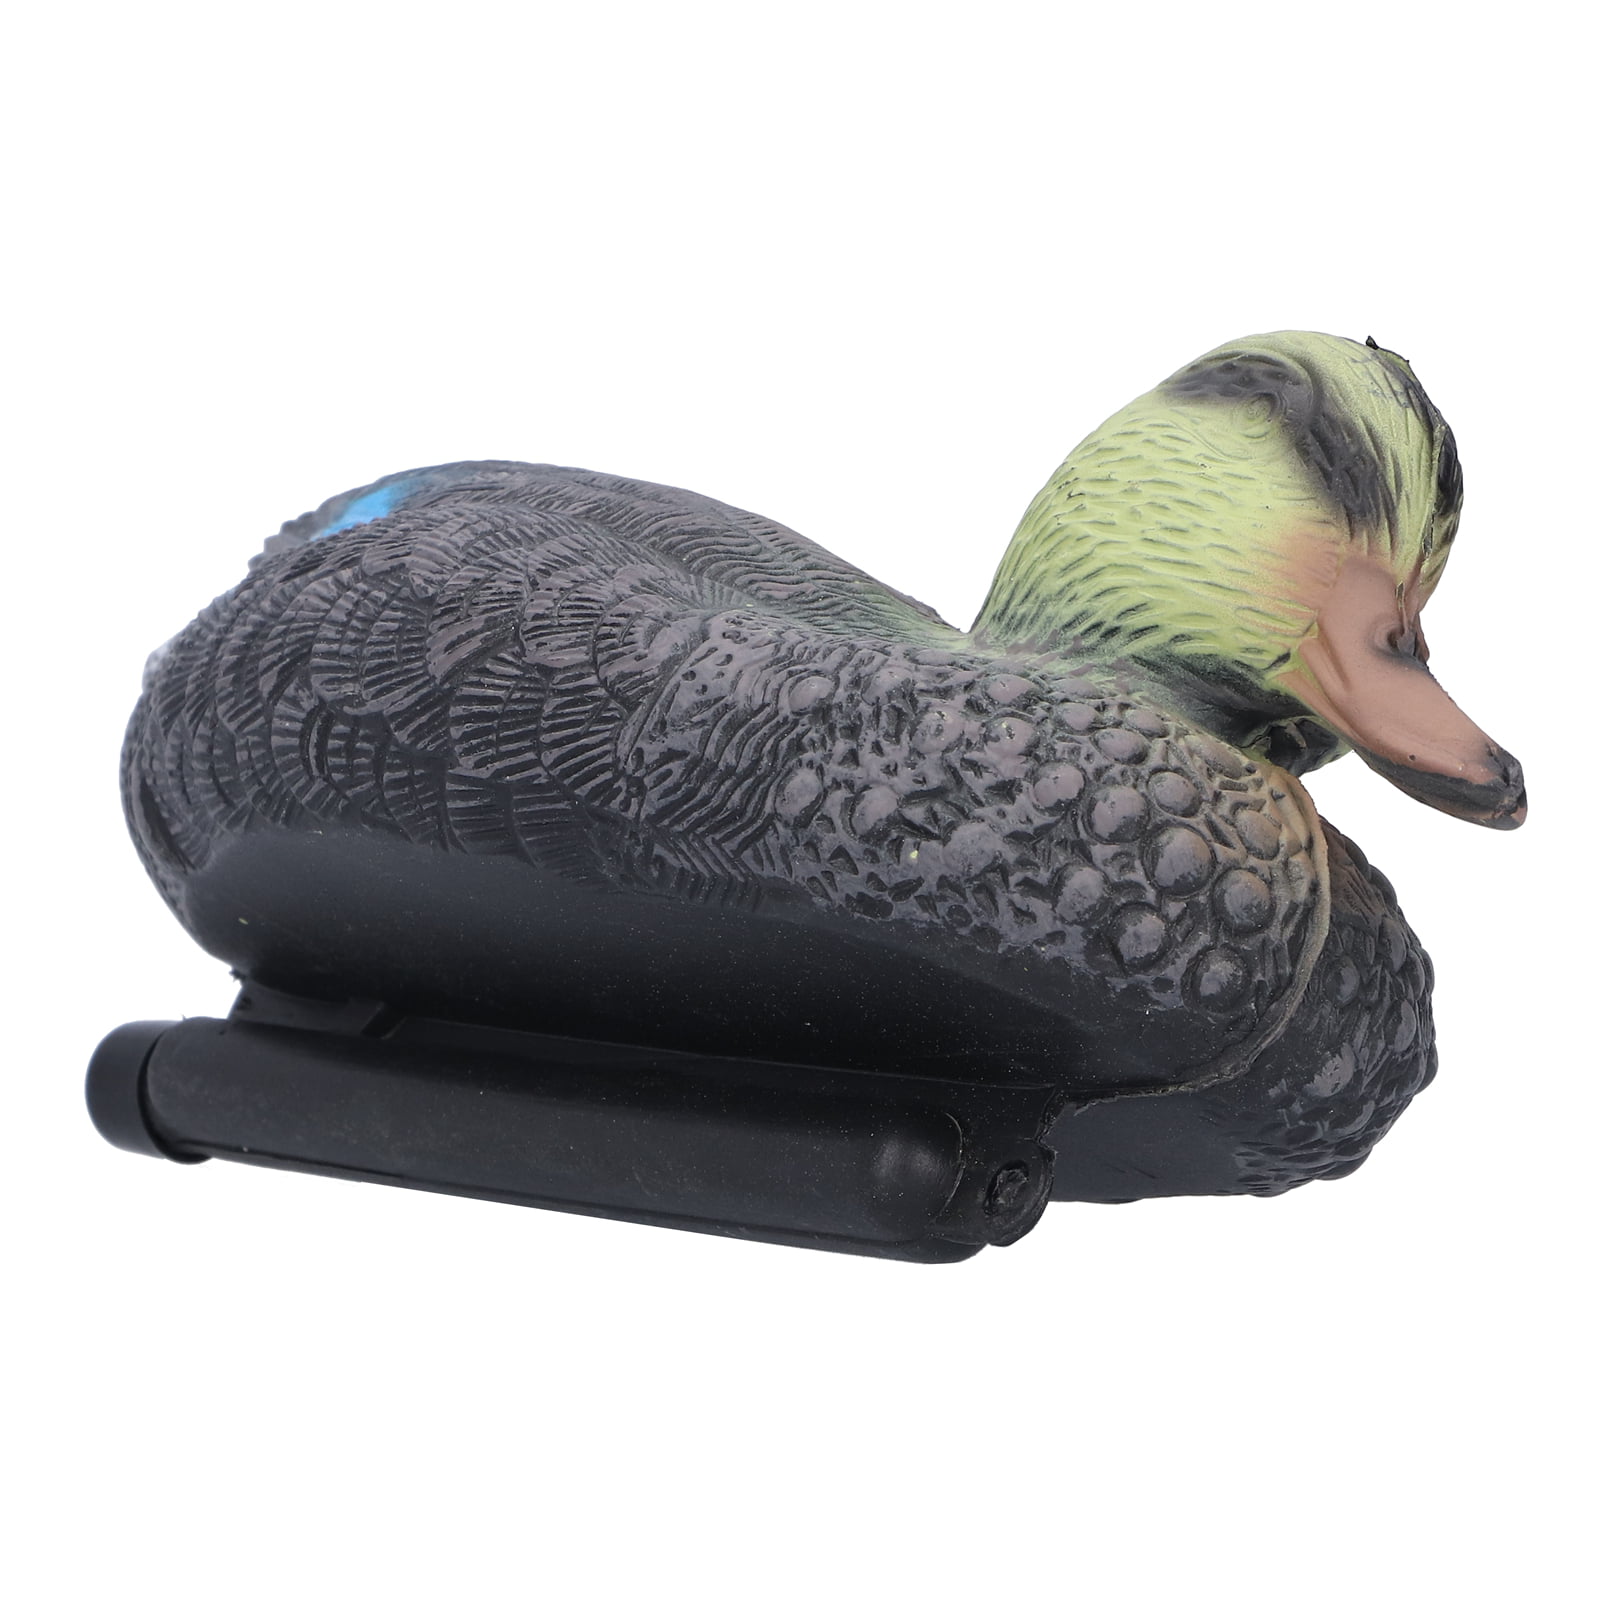 3Piece Small Duck Duckings Floating Decoy Shooting Hunting Decoy Park Decor 